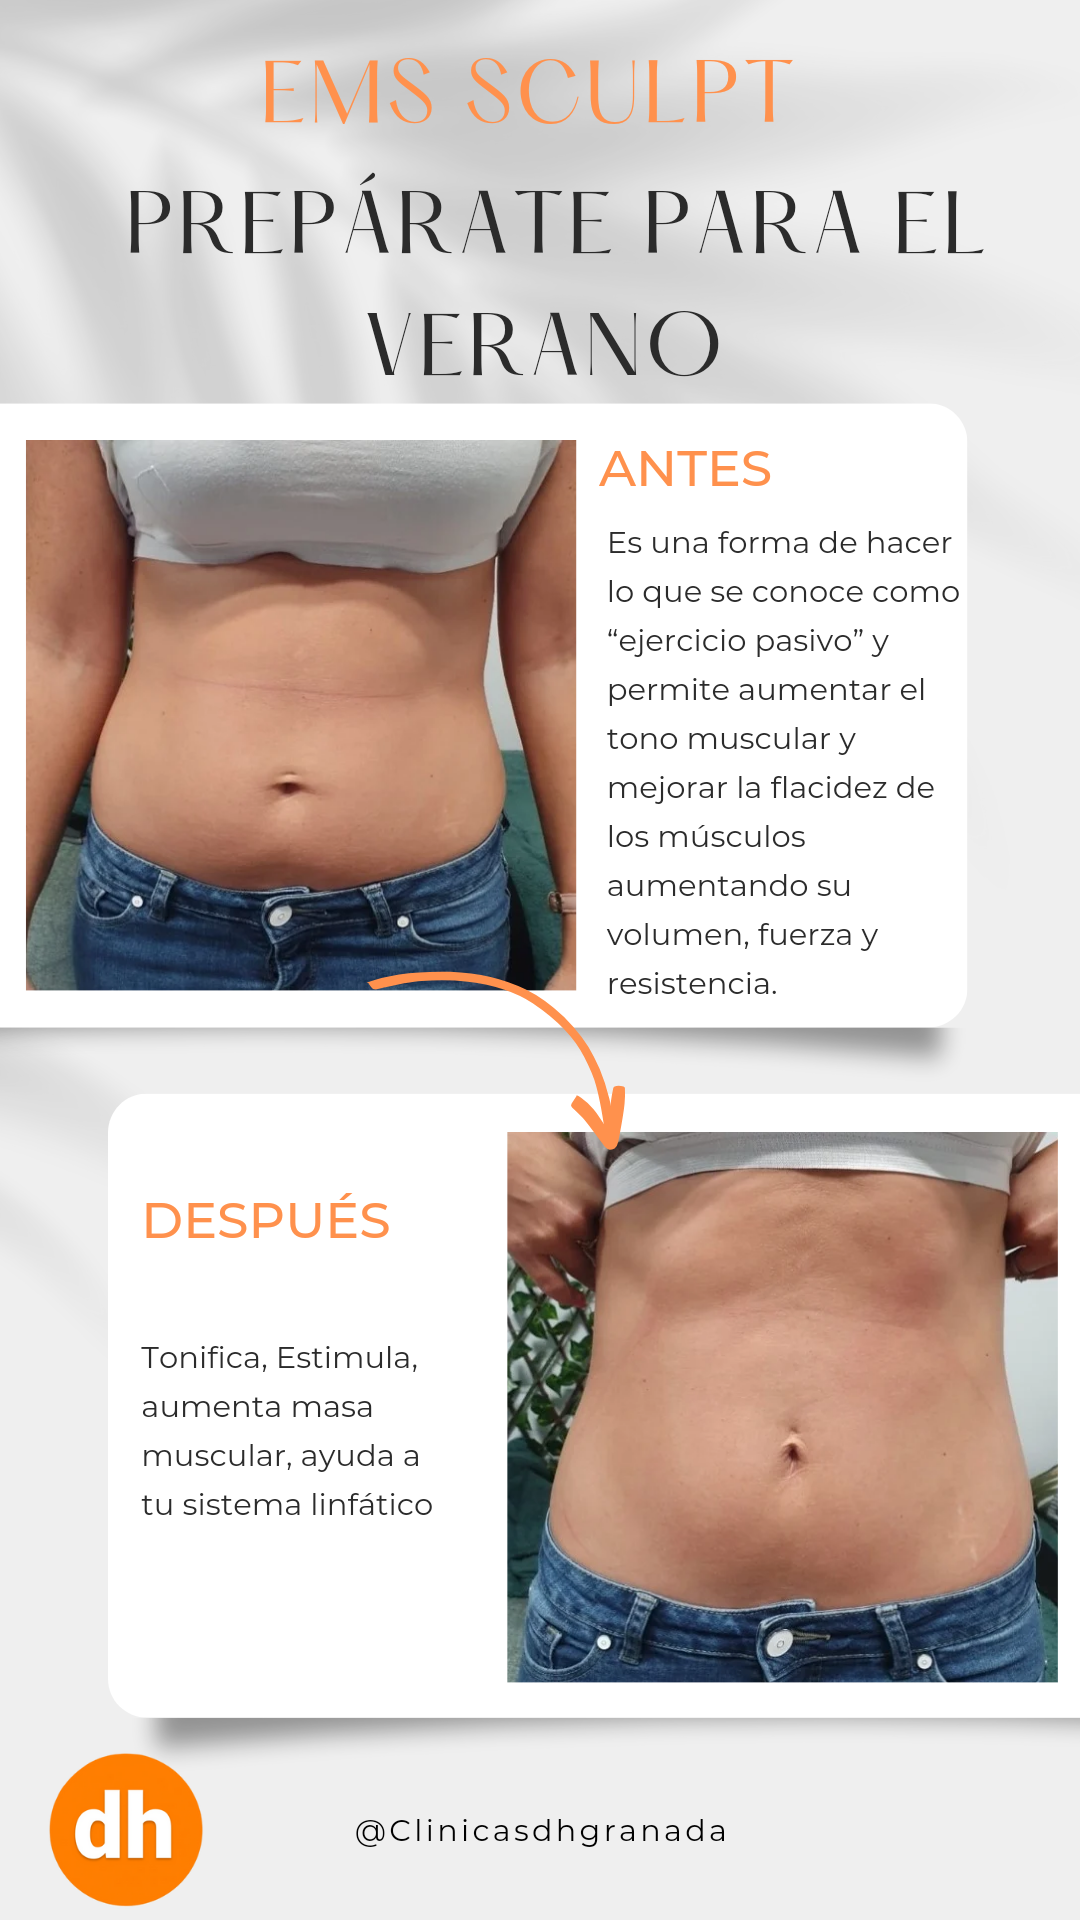 Images Clinicas Dh